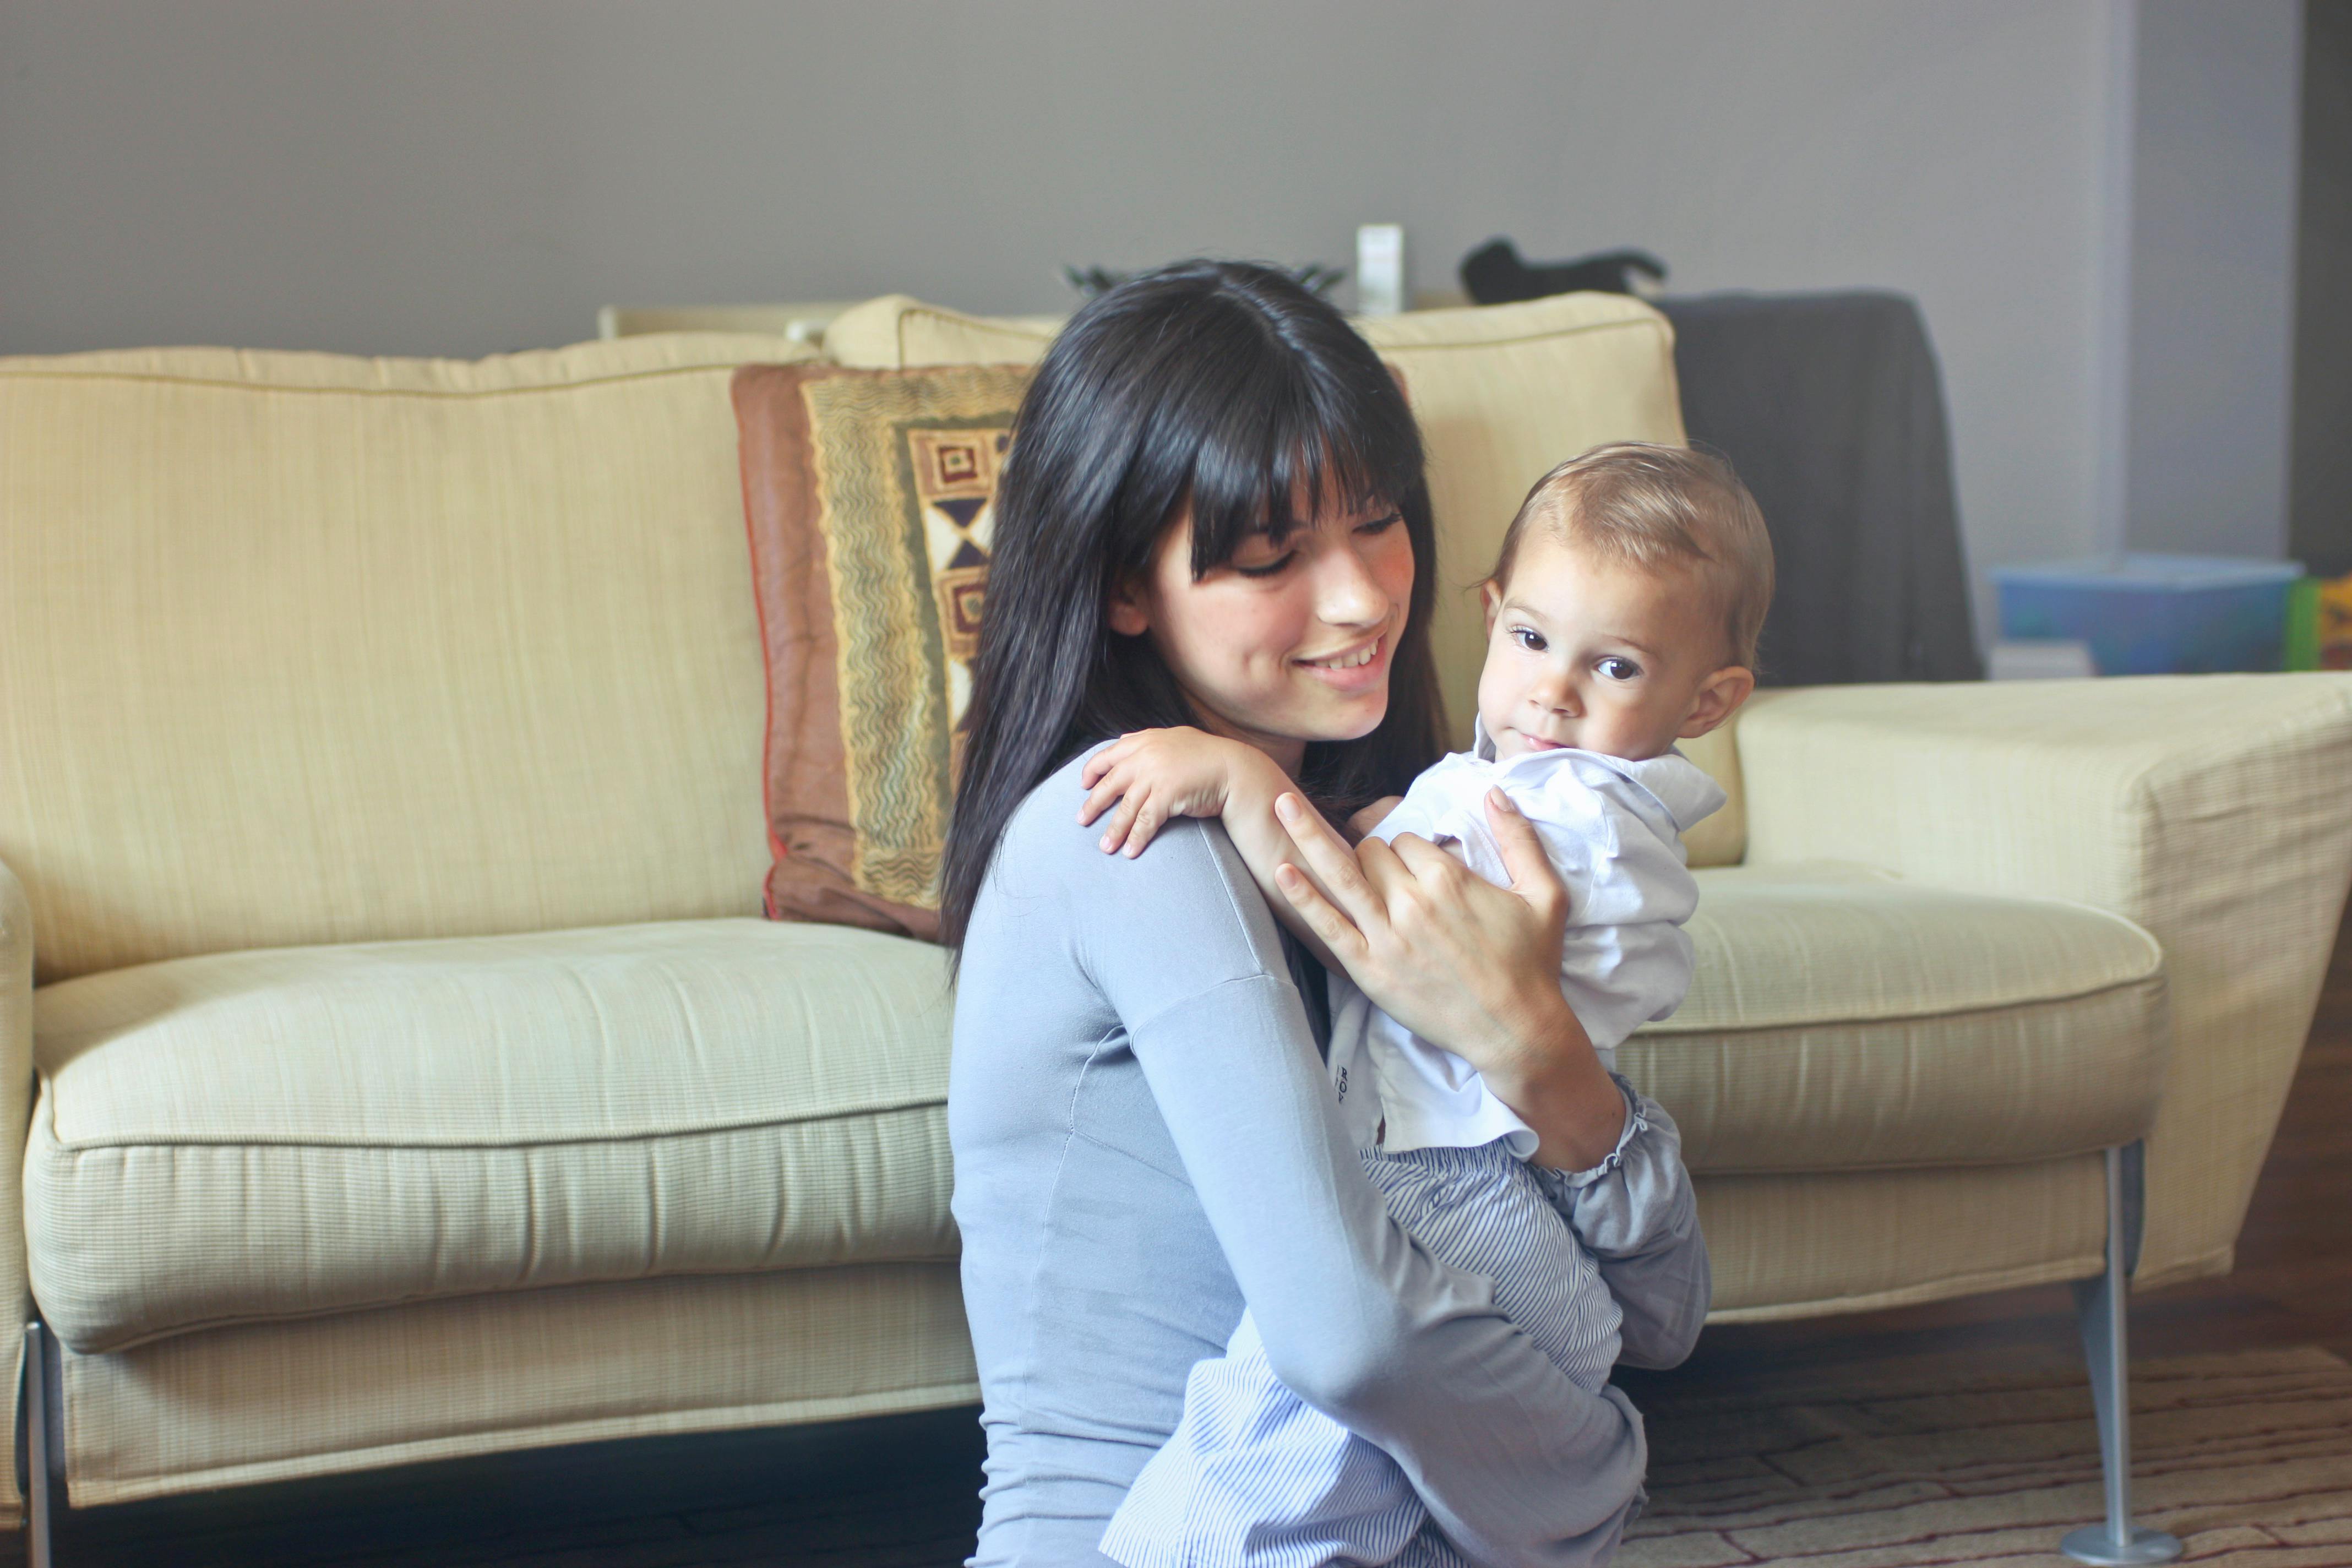 Dark-haired woman with a kid | Source: Pexels